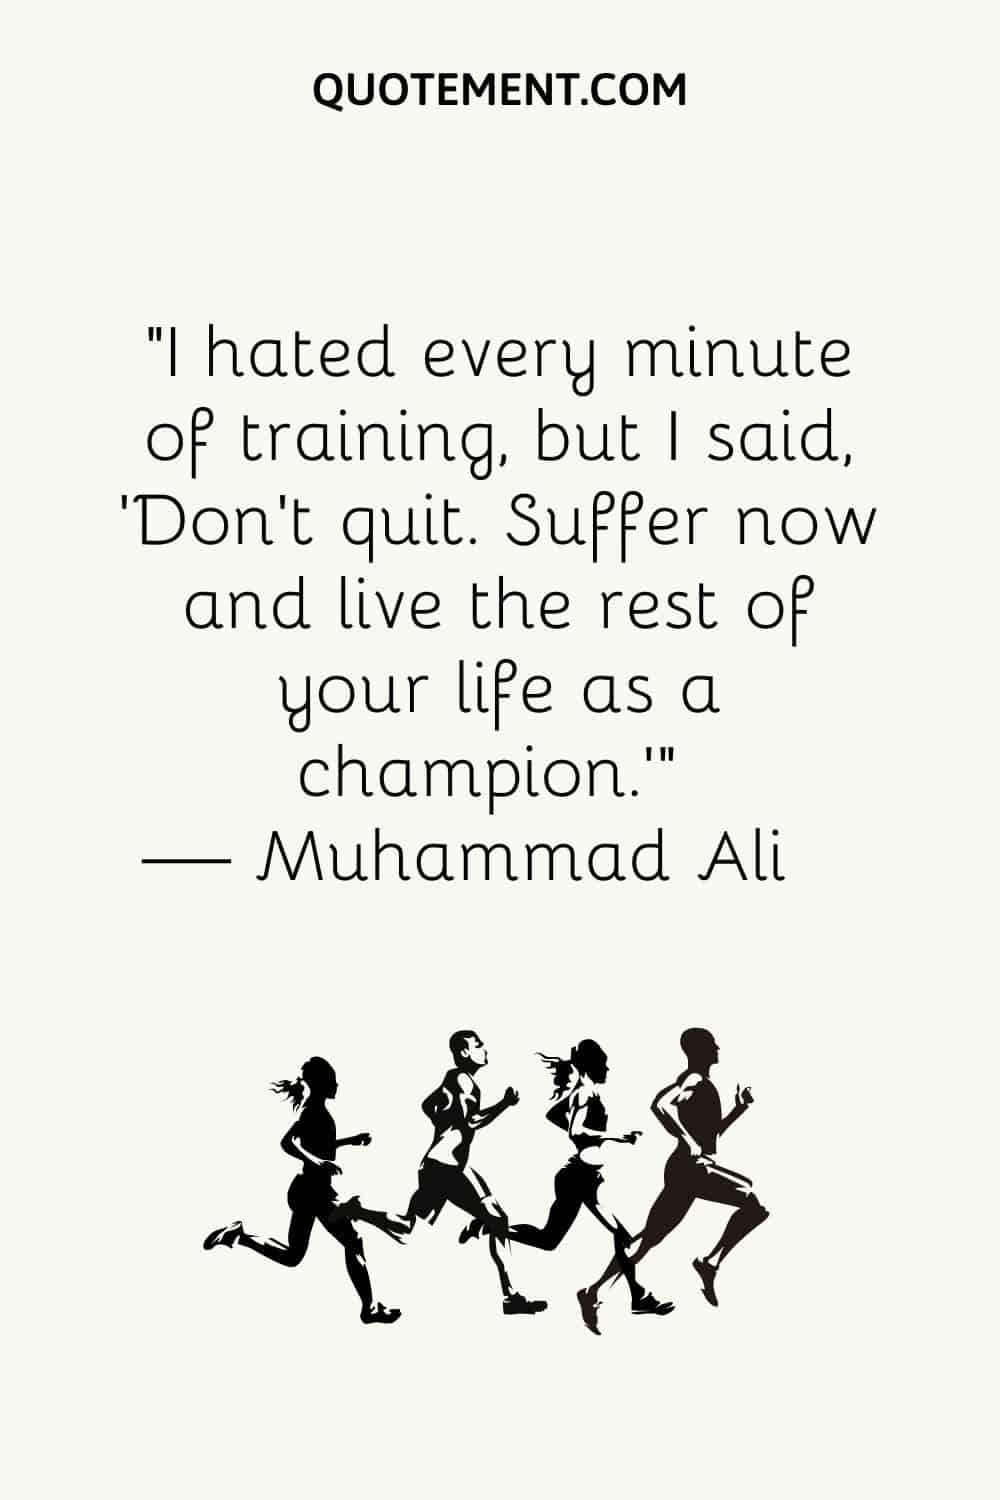 I hated every minute of training, but I said, 'Don't quit.